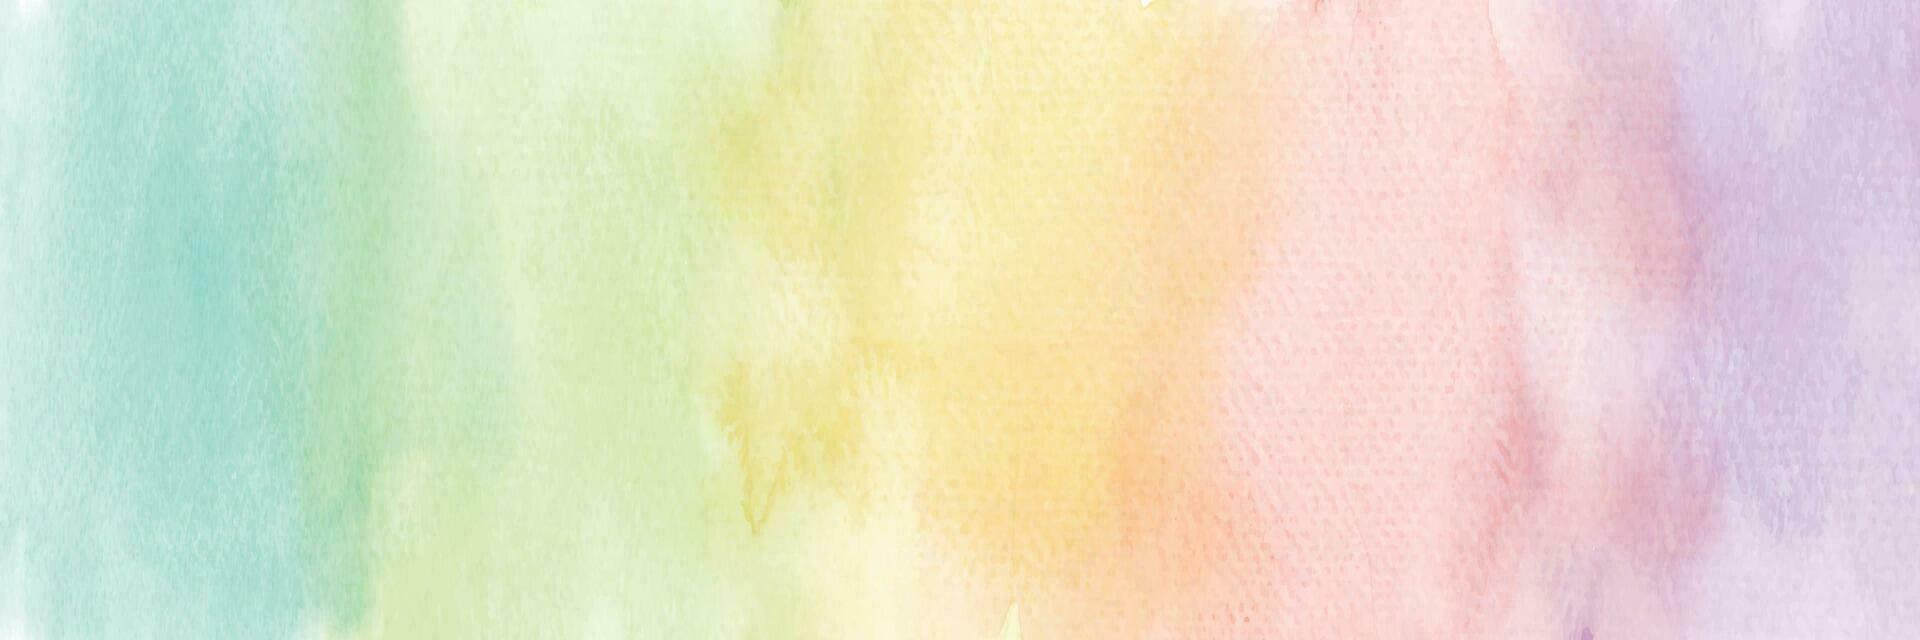 Bright colorful gradients hand-painted watercolor abstract background vector